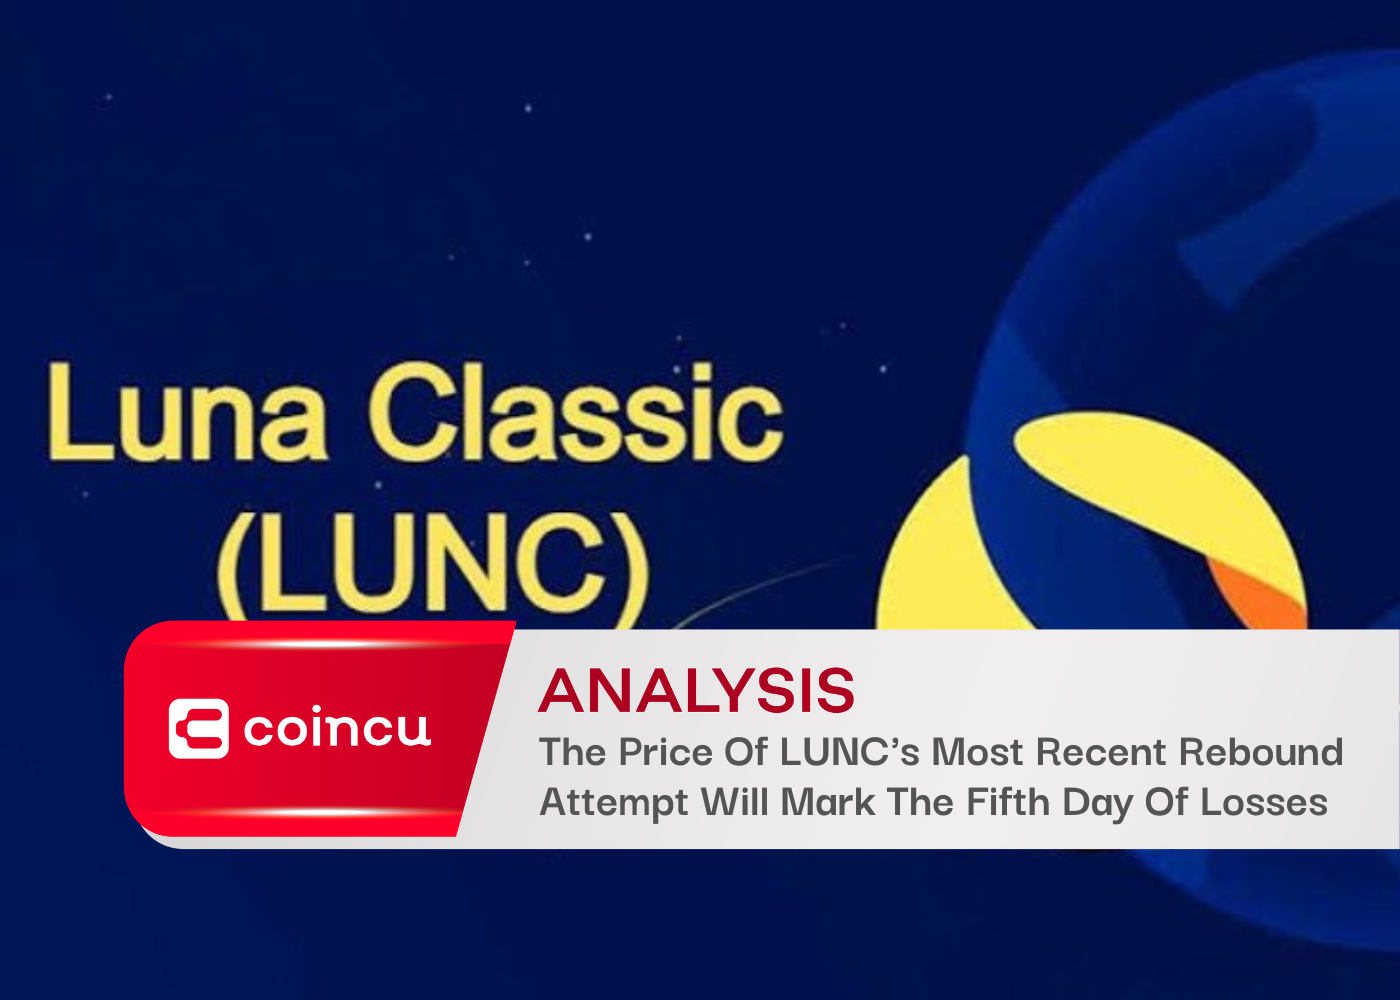 The Price Of LUNCs Most Recent Rebound Attempt